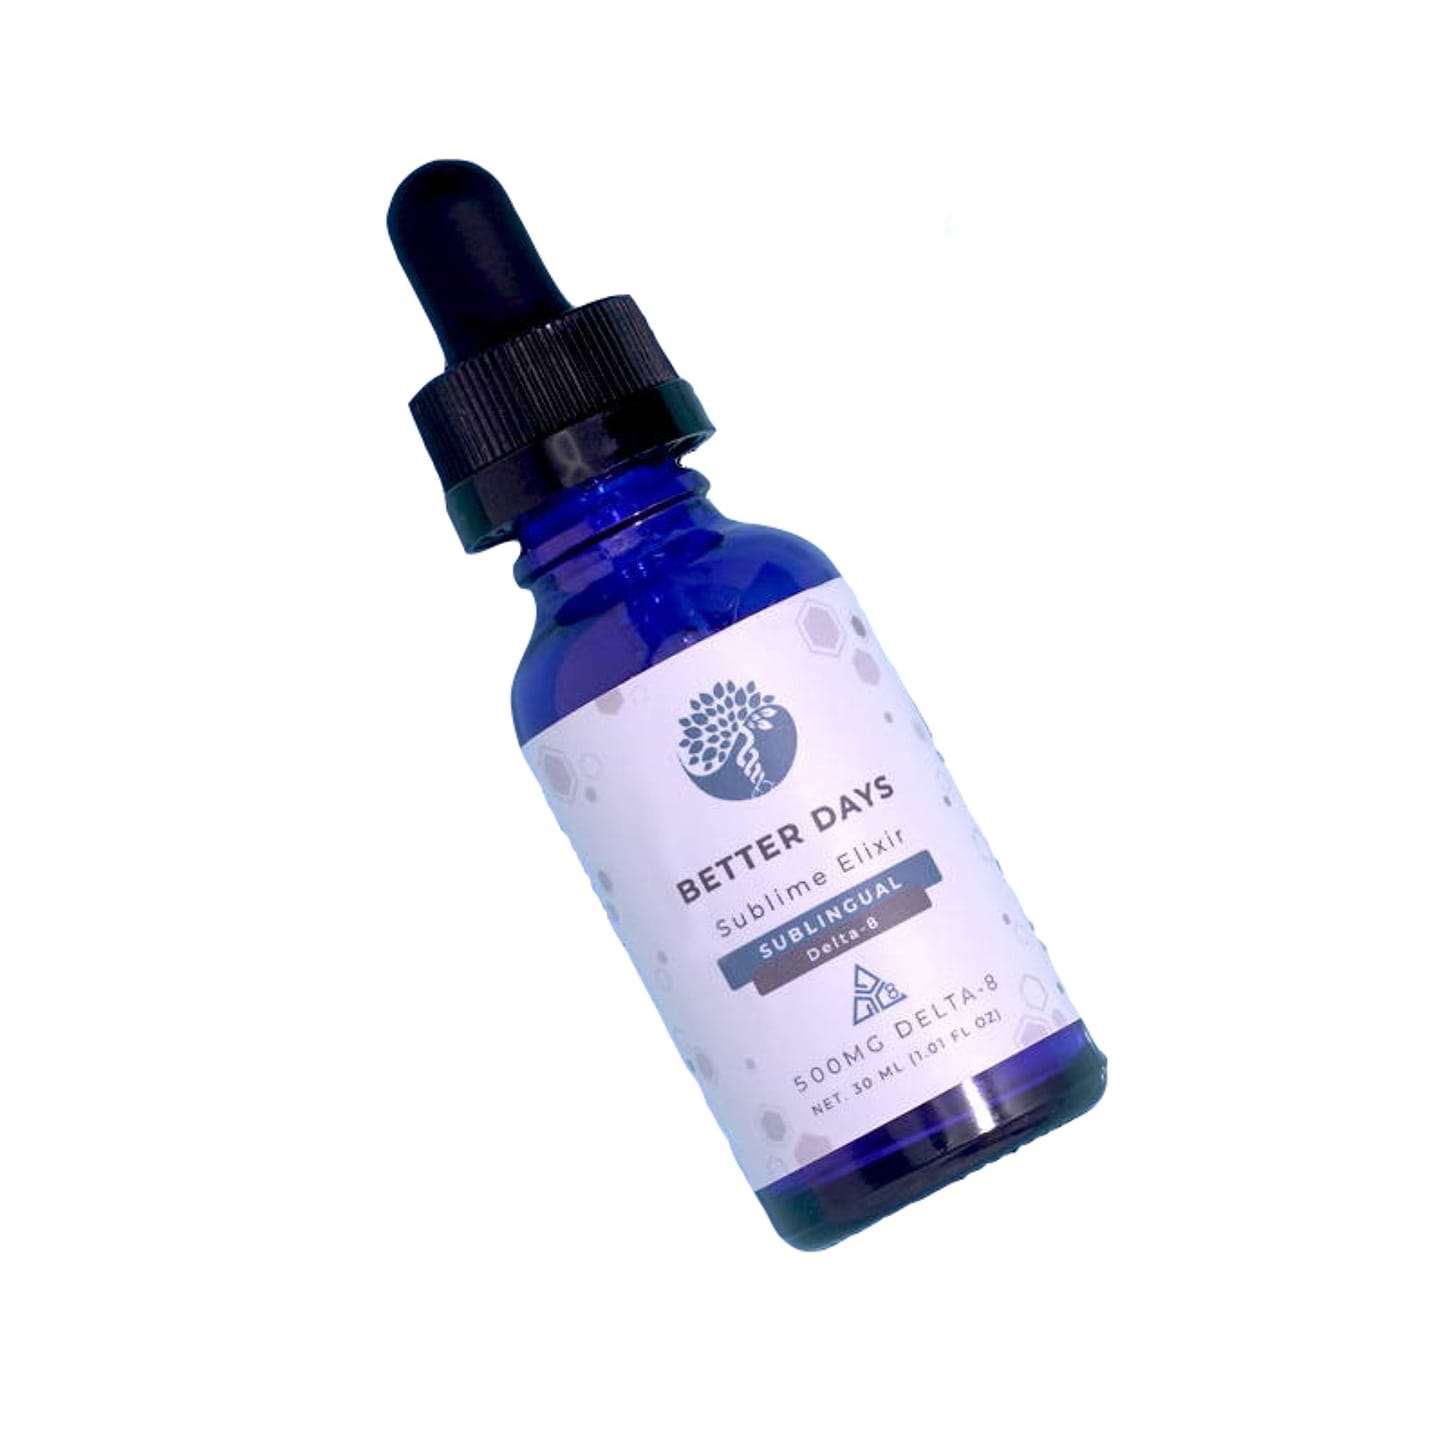 Creating Better Days Delta 8 Sublingual Tincture 500mg